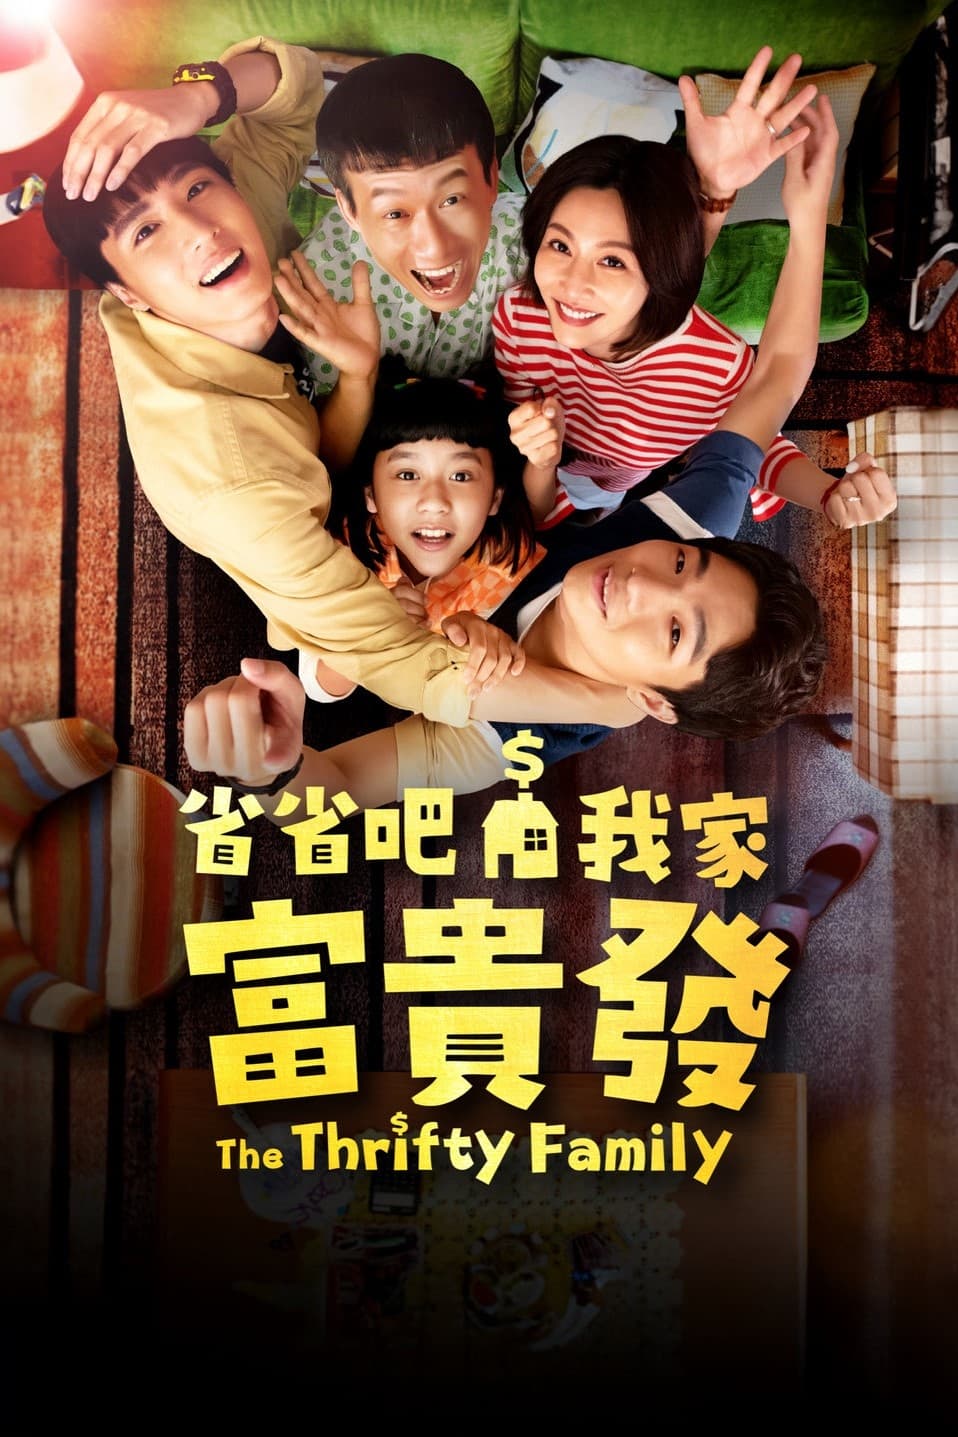 The Thrifty Family